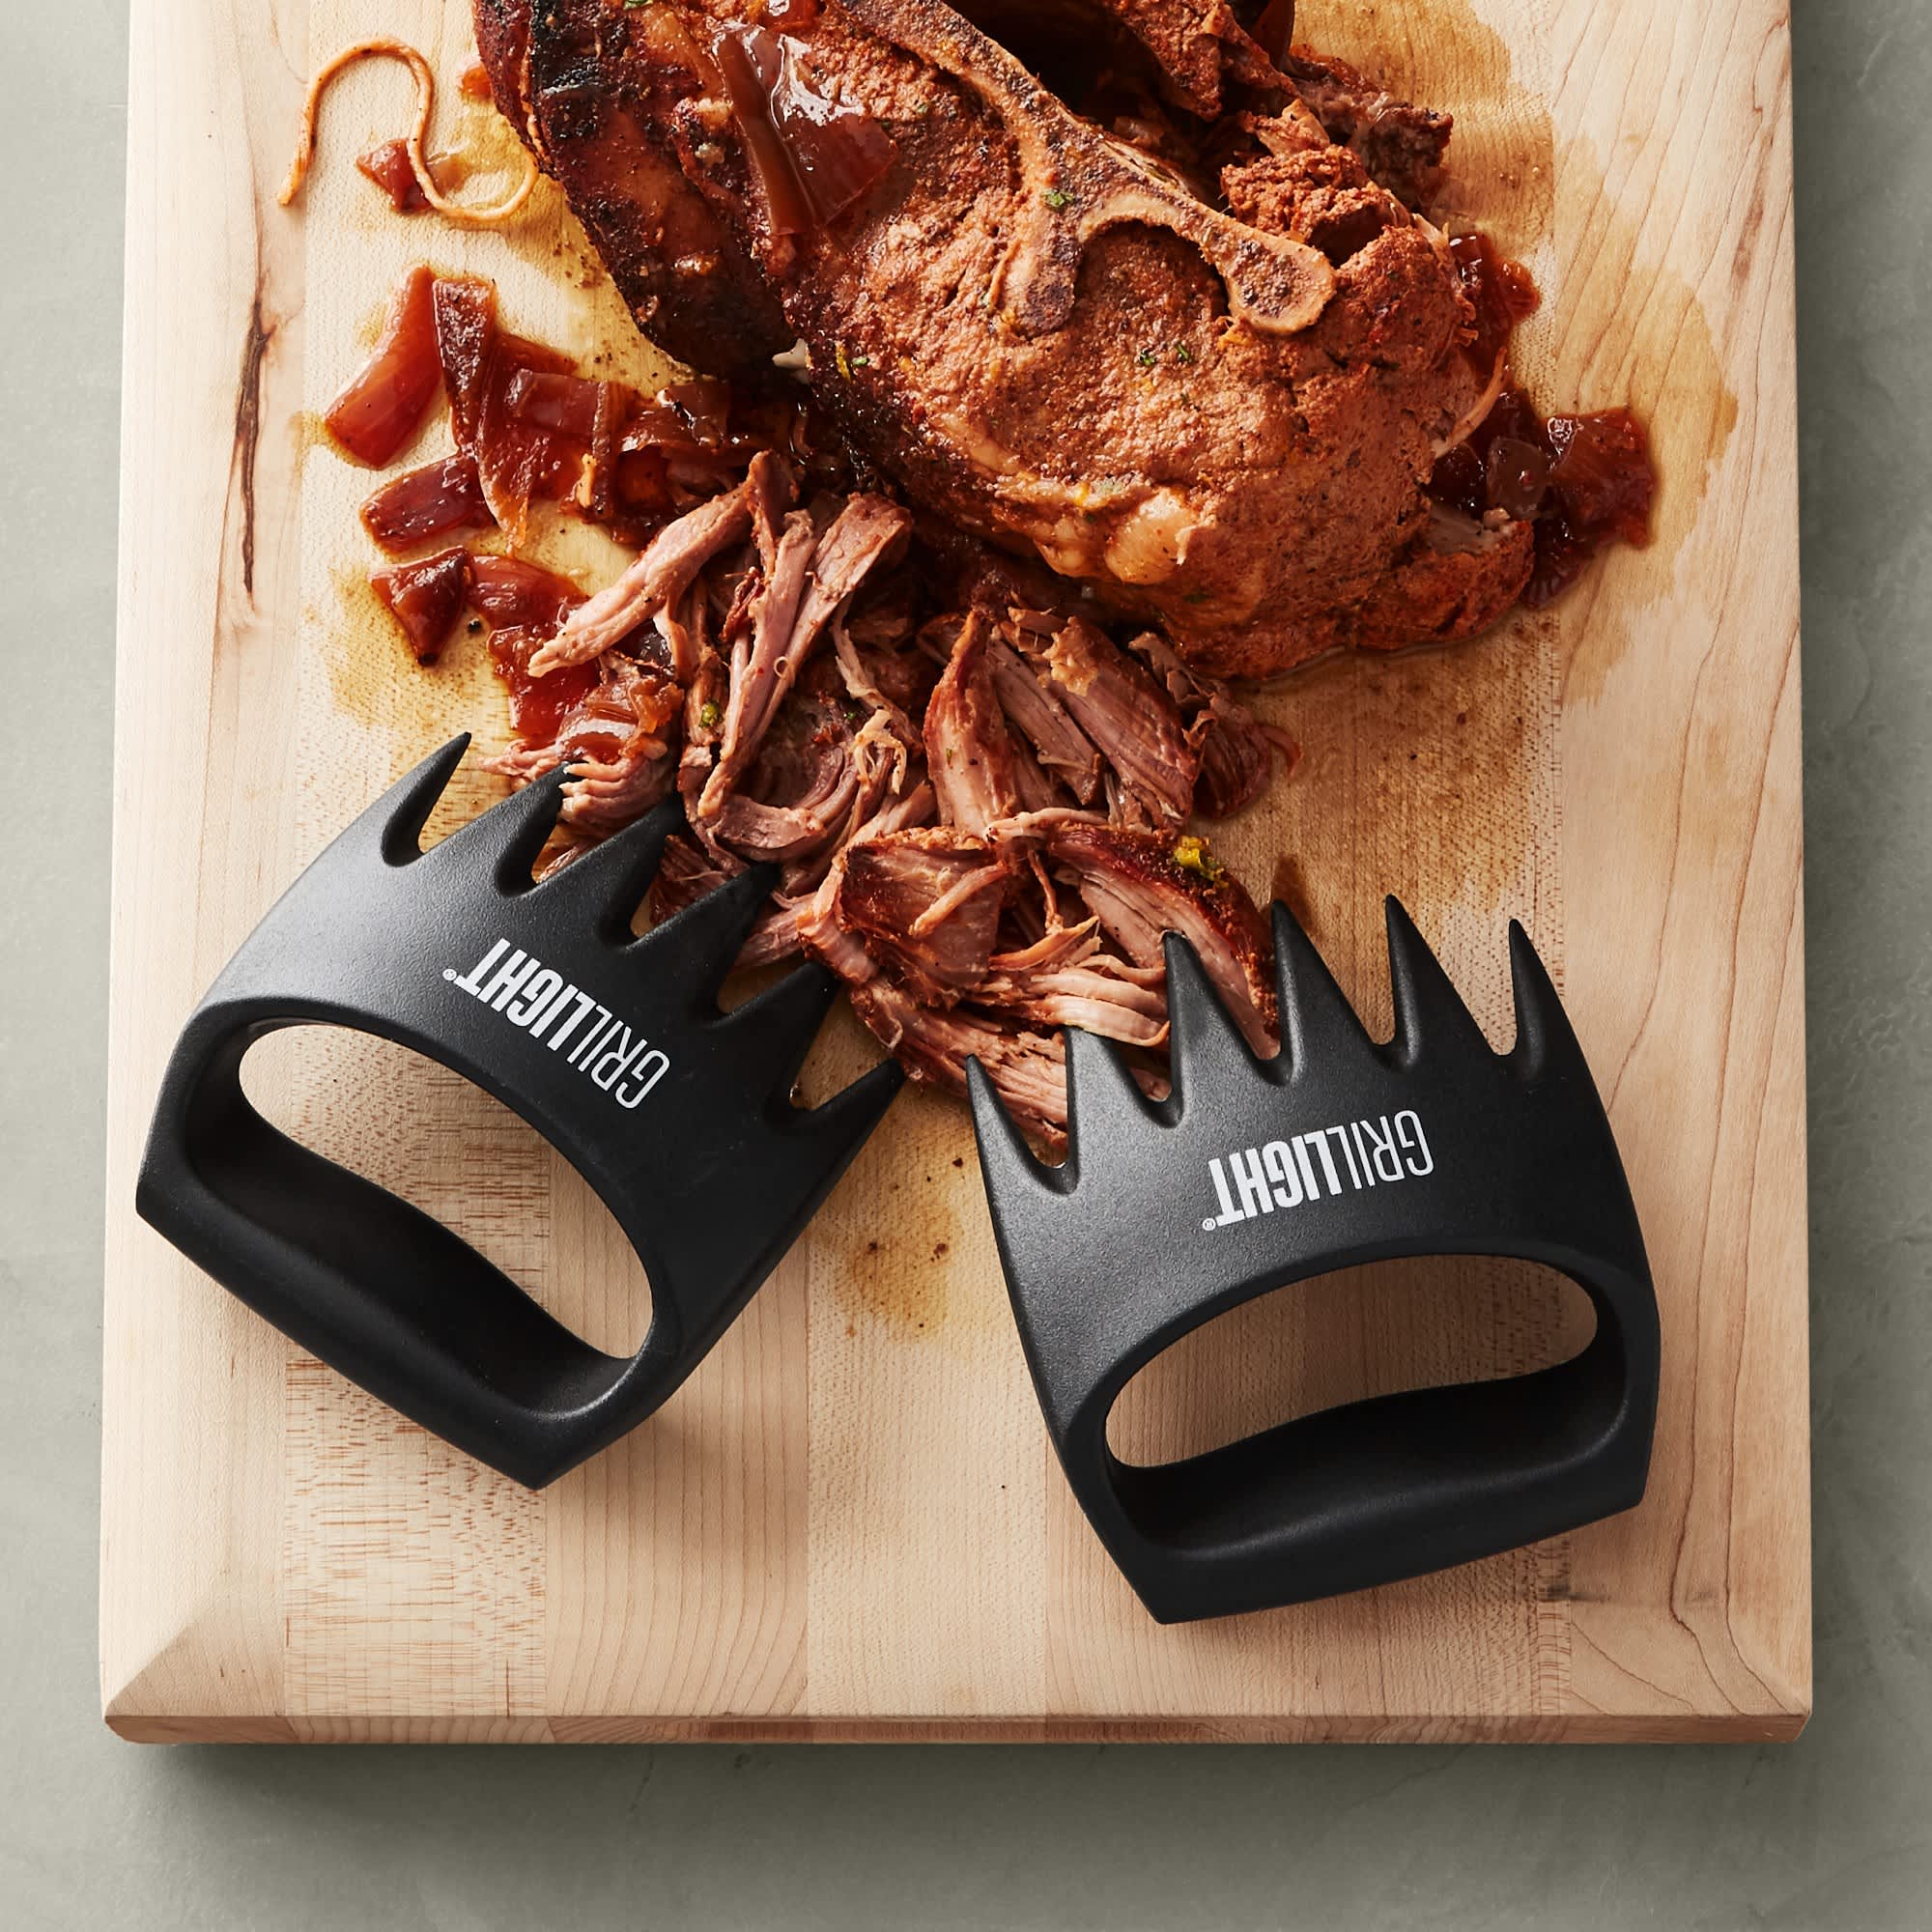 30 Best Grilling Gifts in 2023 for All Skill Levels